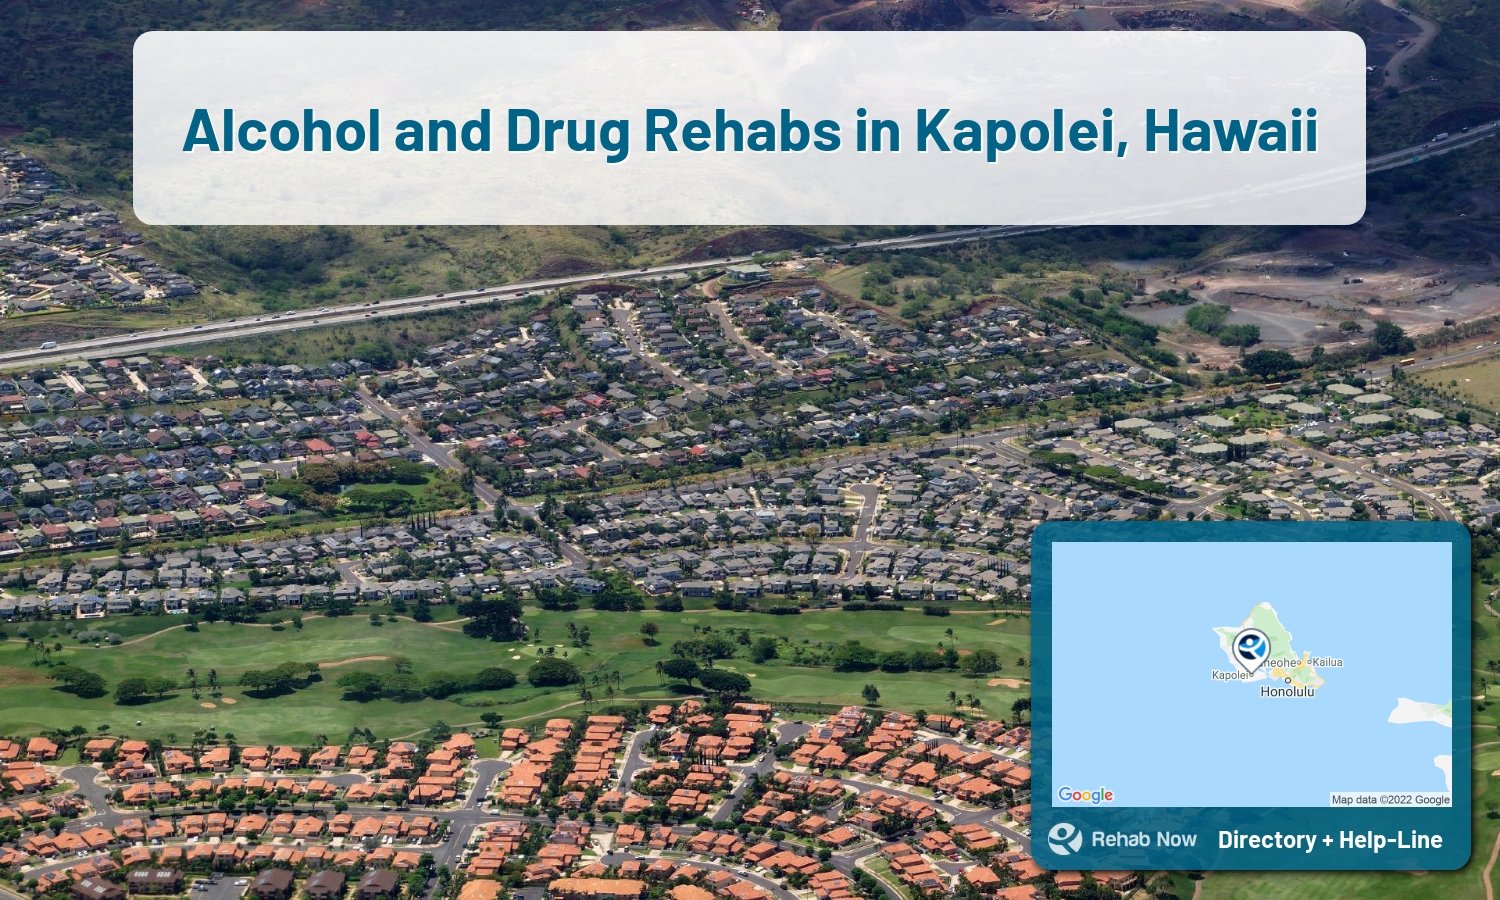 List of alcohol and drug treatment centers near you in Kapolei, Hawaii. Research certifications, programs, methods, pricing, and more.